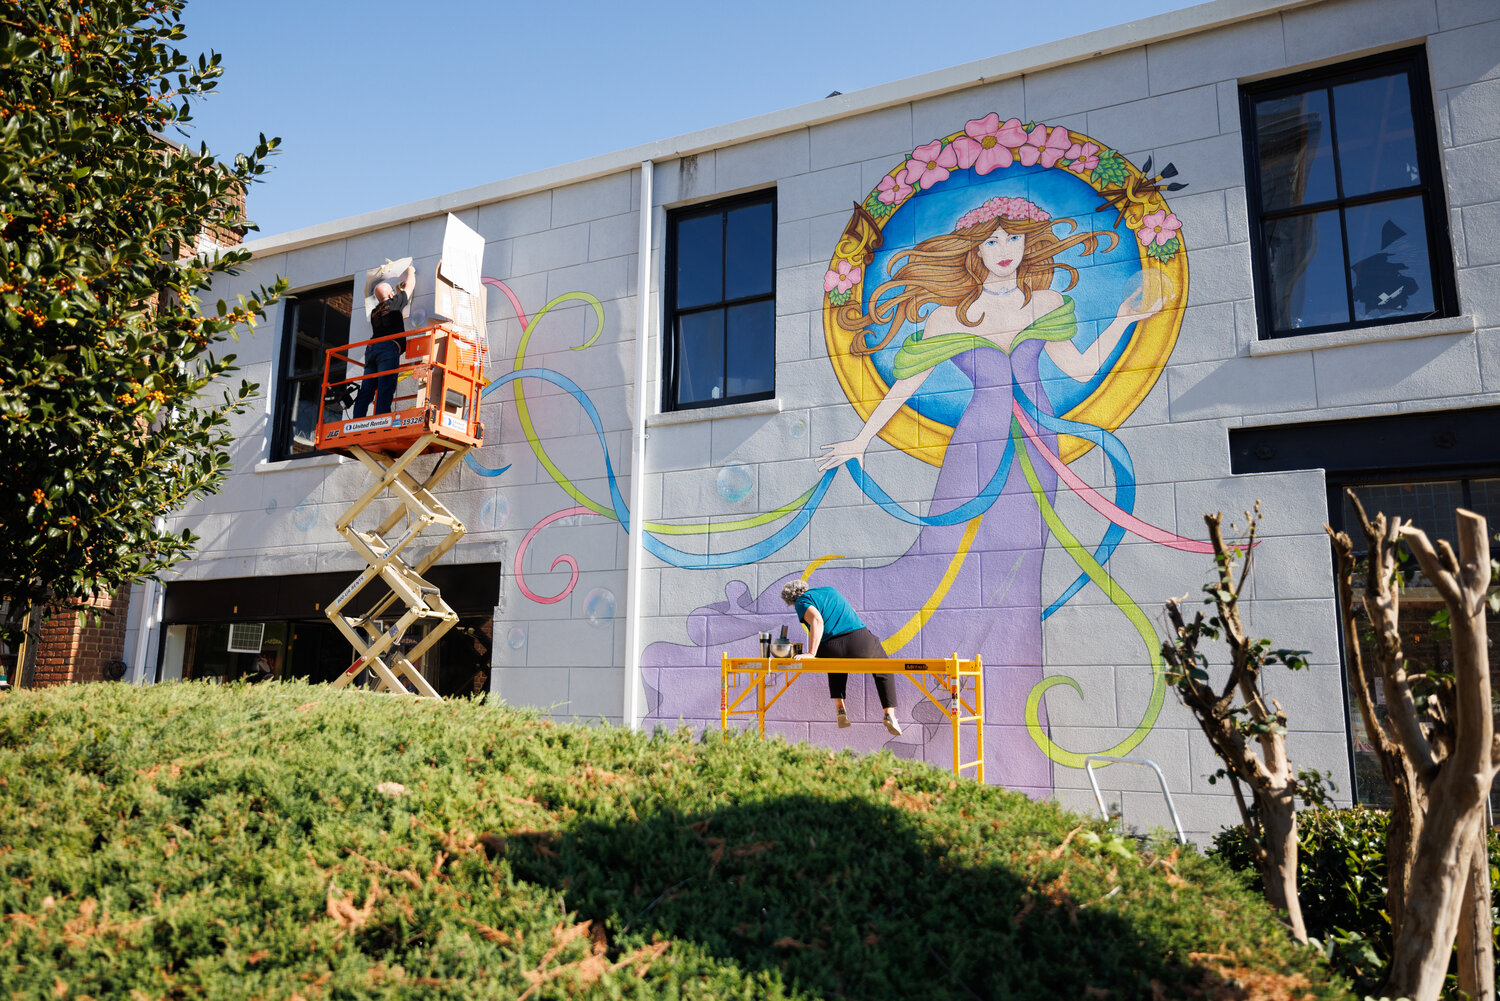 The "Lady Muriel" mural adorns the western side of the 101 Person St. building, which houses The Sweet Palette and Blanc Coffee Roasters, facing the intersection of Market Square. “I looked up what Muriel meant, and it meant ‘sparkling and bright,’” Patsy said. “And I thought that was perfect because [the mural] is brightening up this corner on Market Street.”